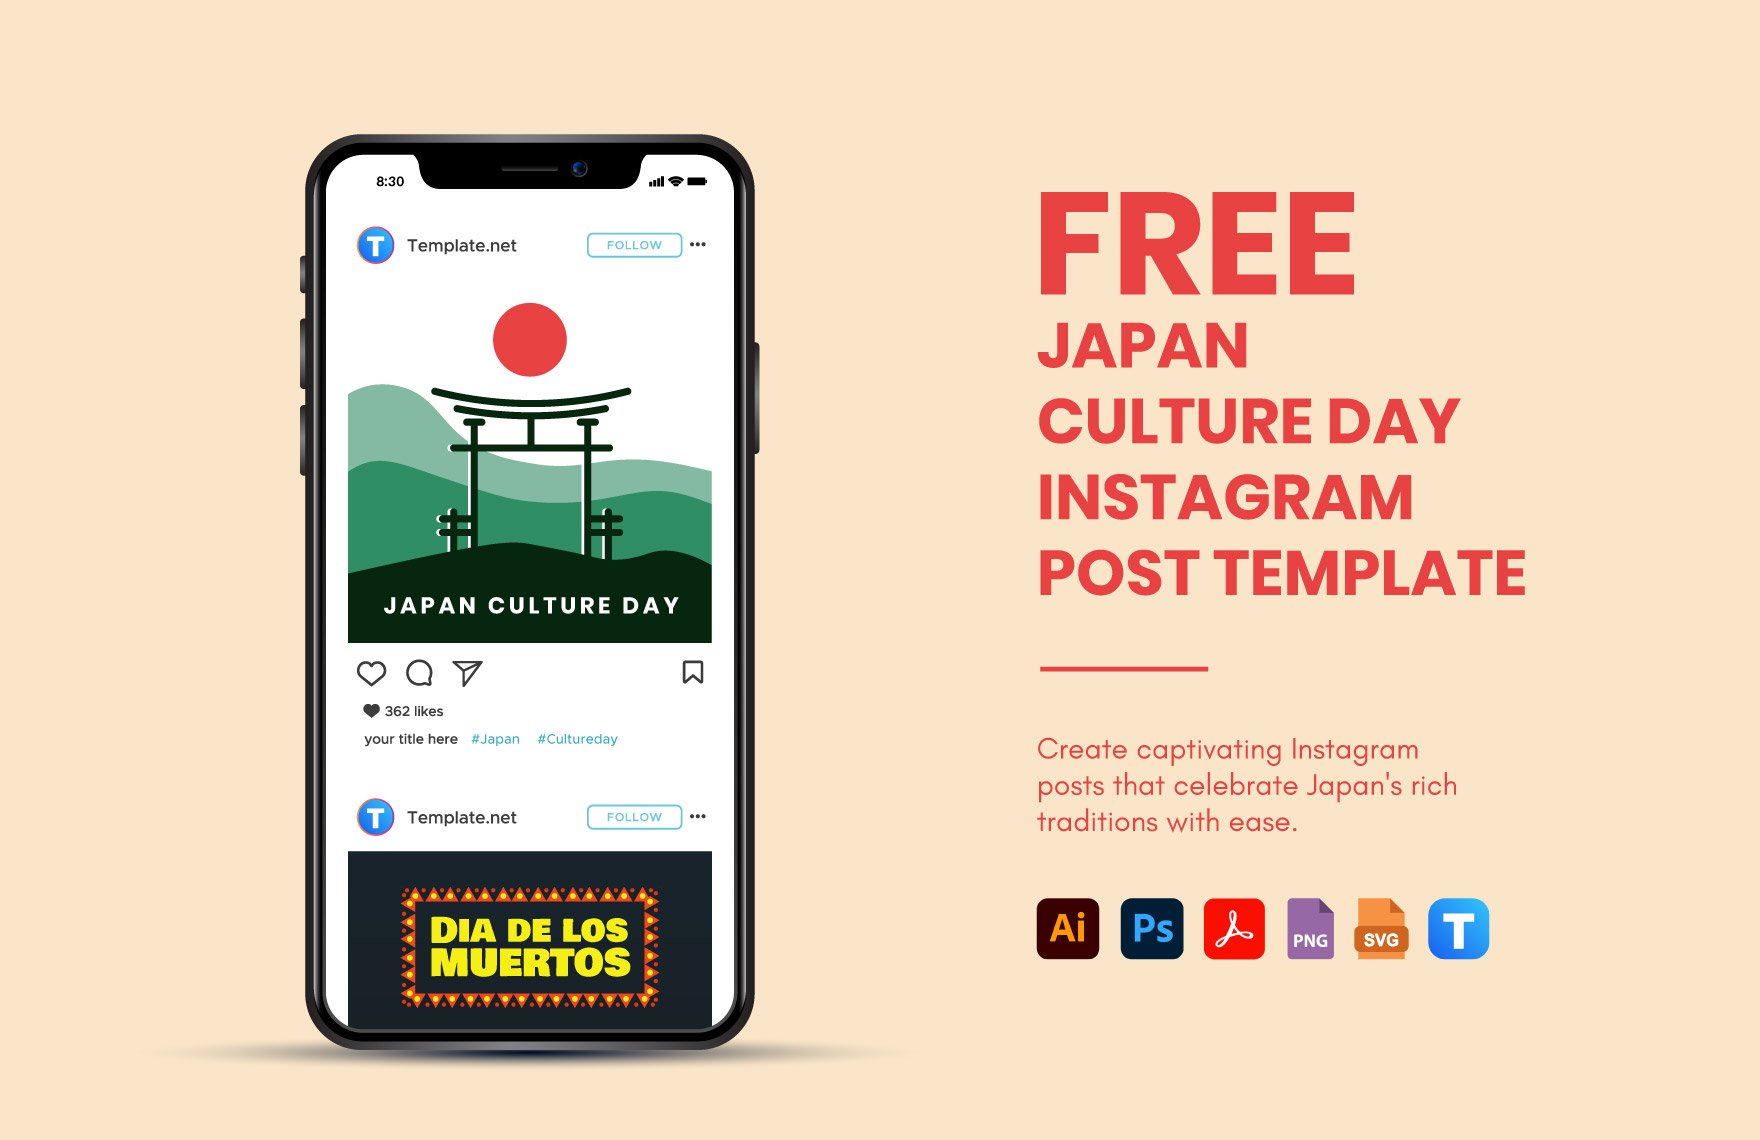 Free Japan Culture Day Instagram Post Template in PDF, Illustrator, PSD, SVG, PNG